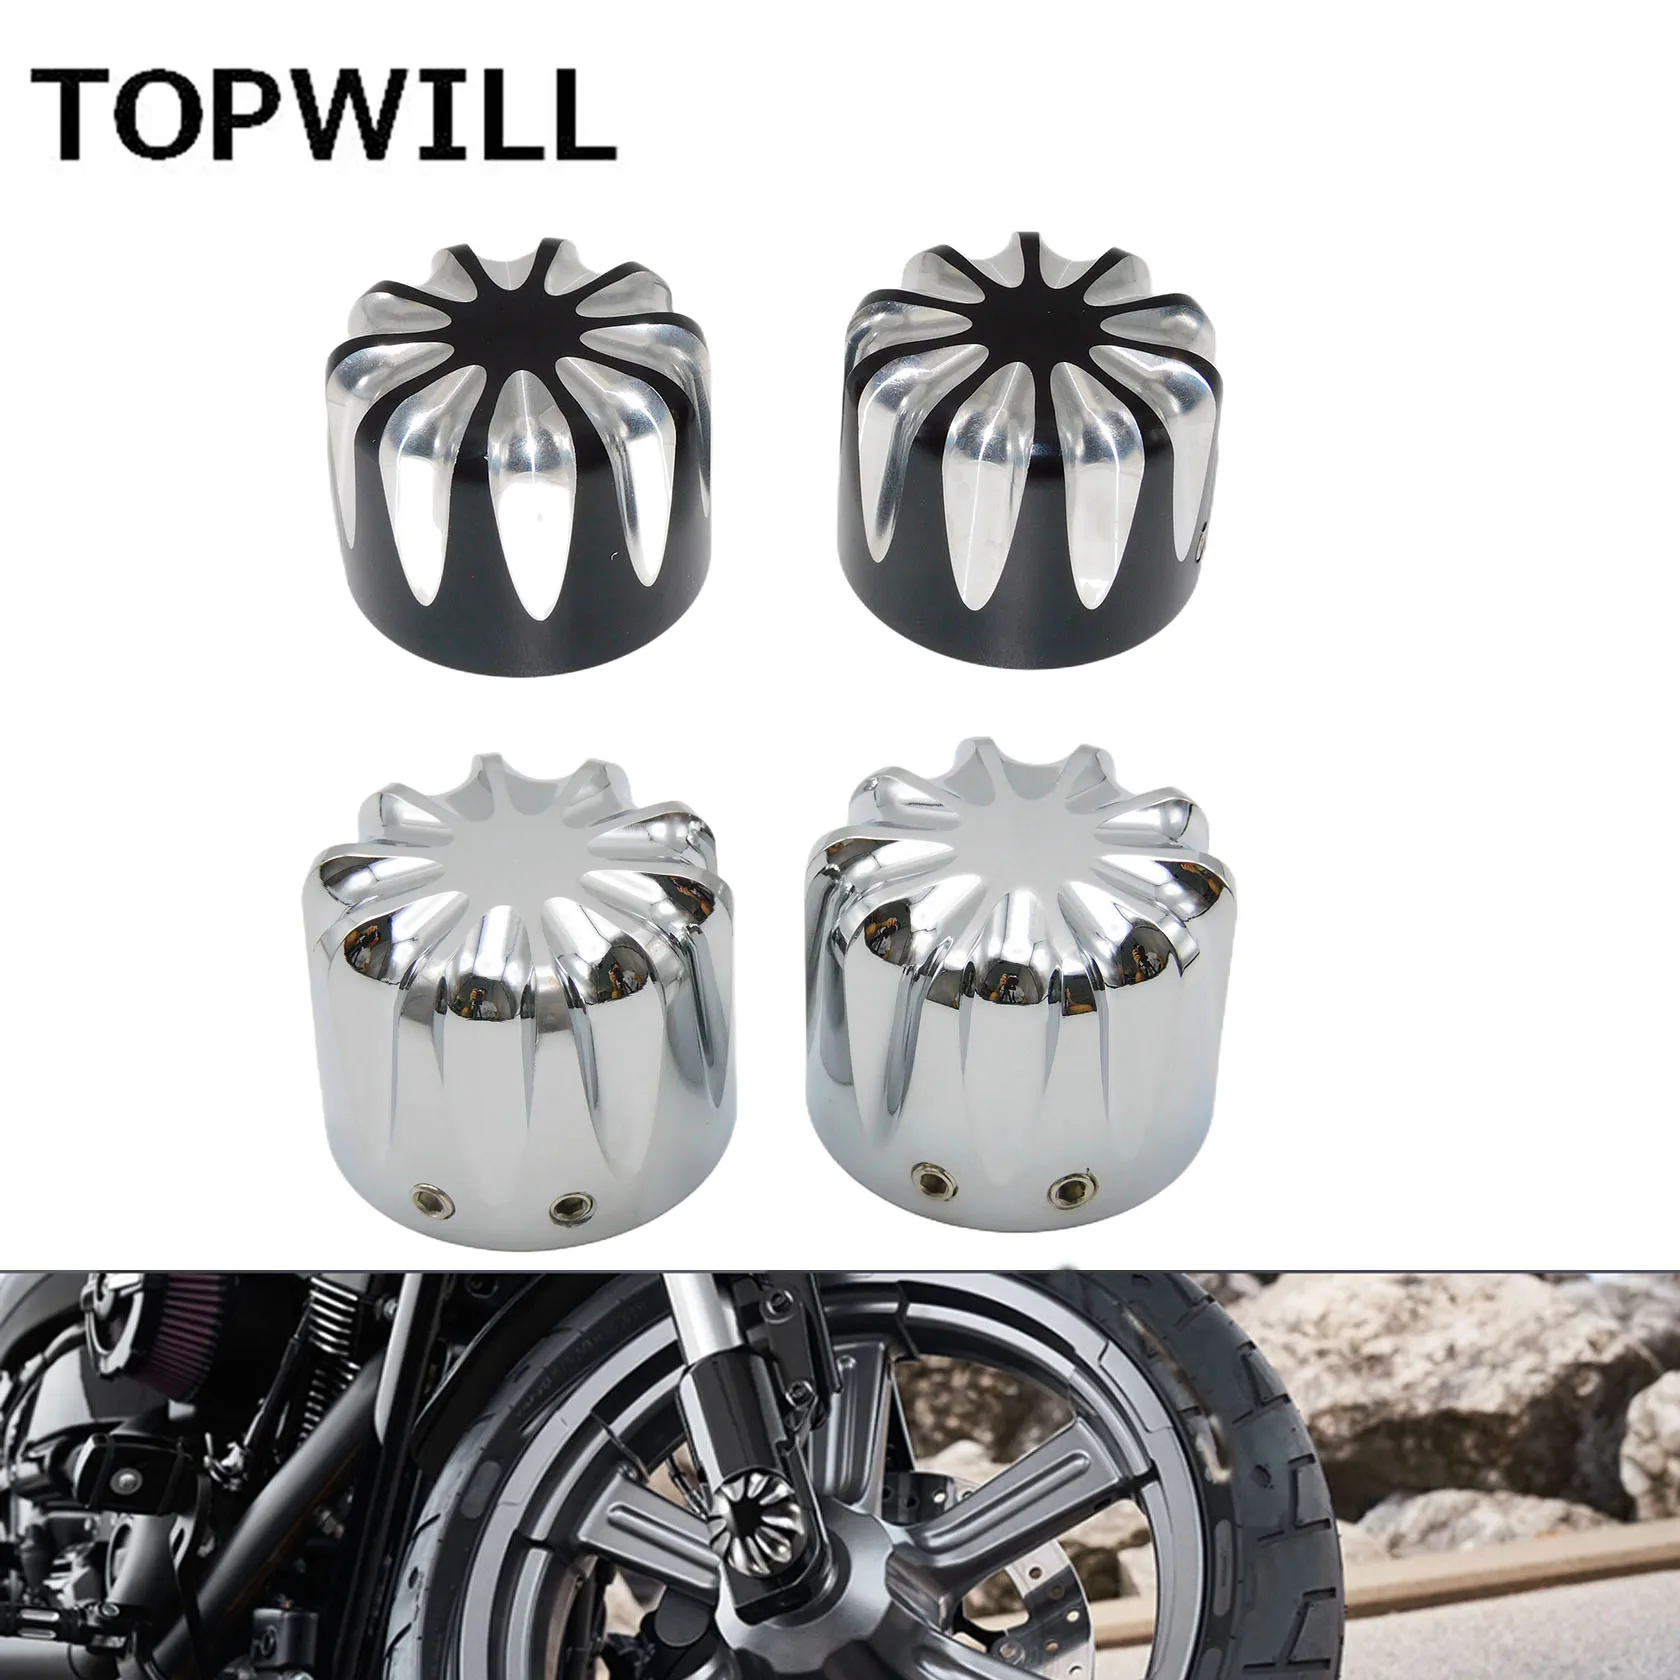 

Motorcycle Front Axle Nut Covers Caps CNC Aluminum For Harley Touring Street Road Glide Softail Dyna Fat Bob Sportster XL 883